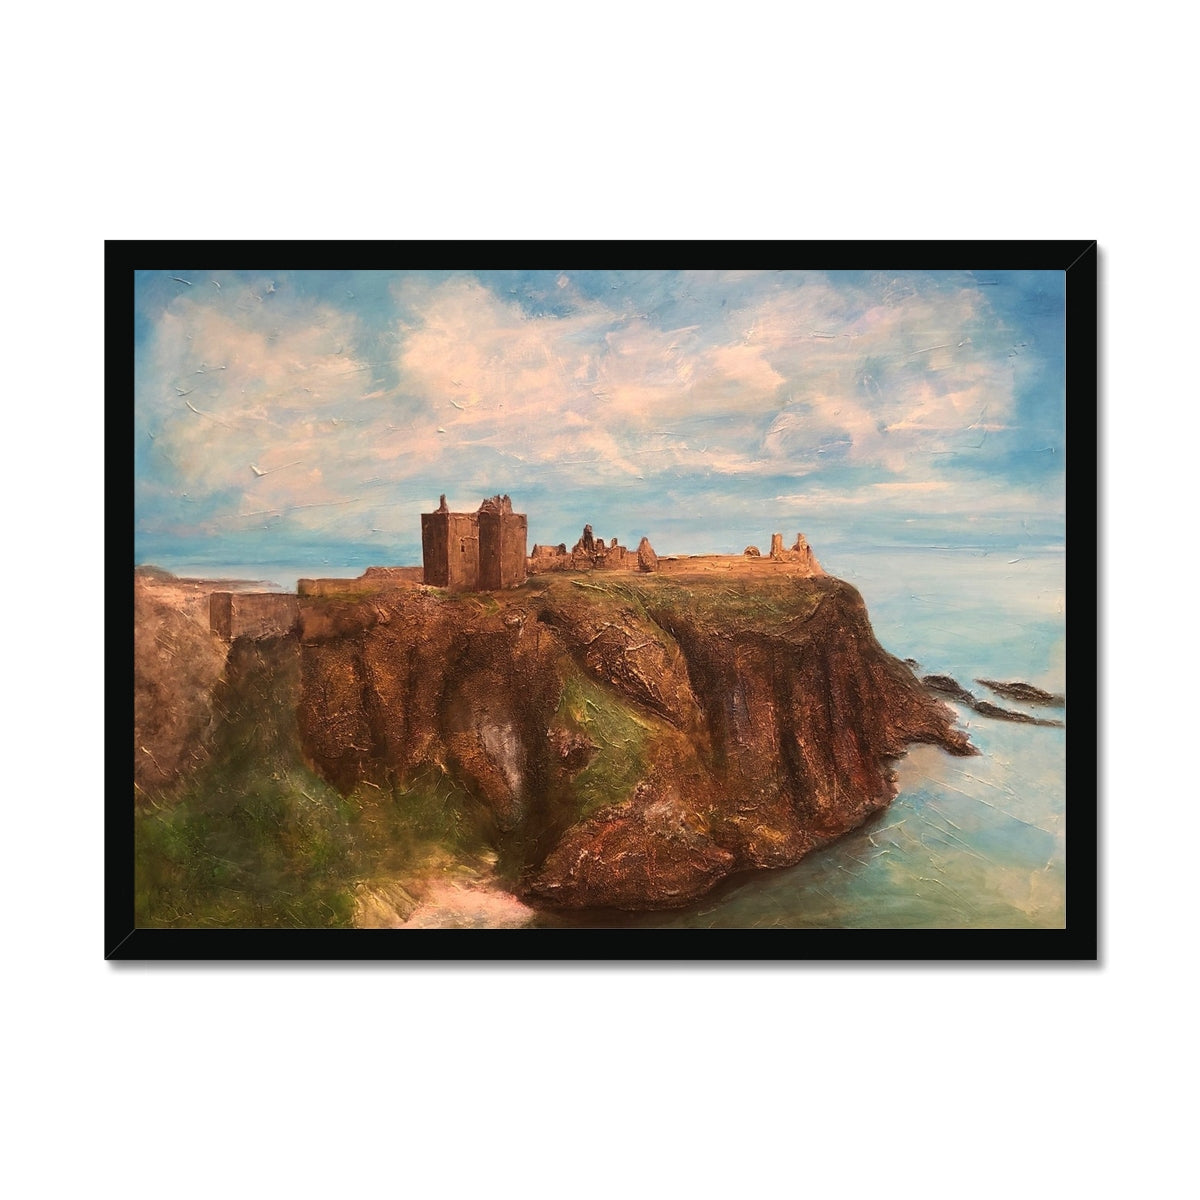 Dunnottar Castle Painting | Framed Prints From Scotland-Framed Prints-Historic & Iconic Scotland Art Gallery-A2 Landscape-Black Frame-Paintings, Prints, Homeware, Art Gifts From Scotland By Scottish Artist Kevin Hunter